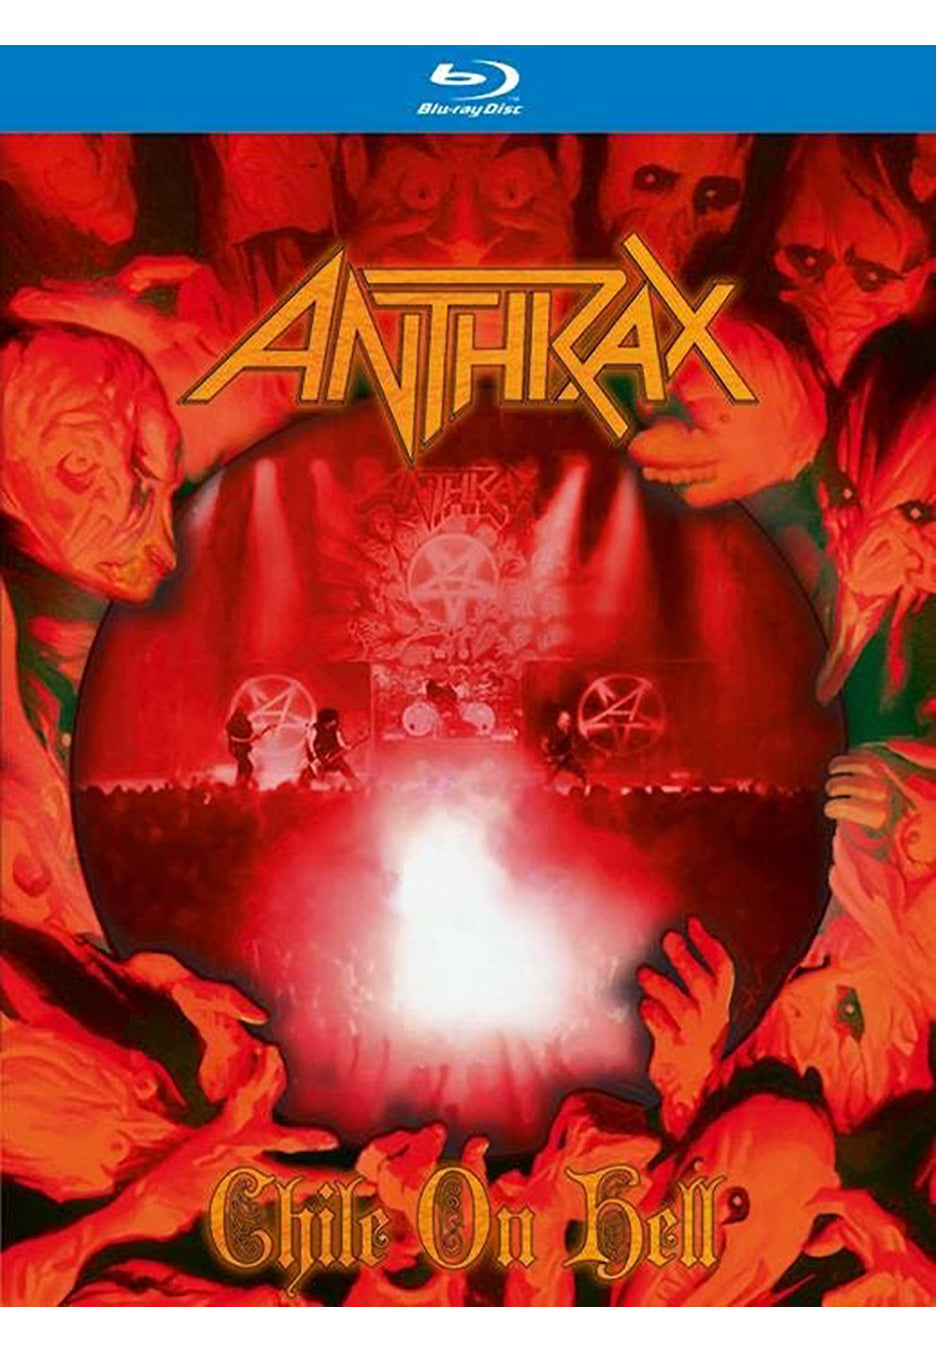 Anthrax - Chile On Hell - BluRay